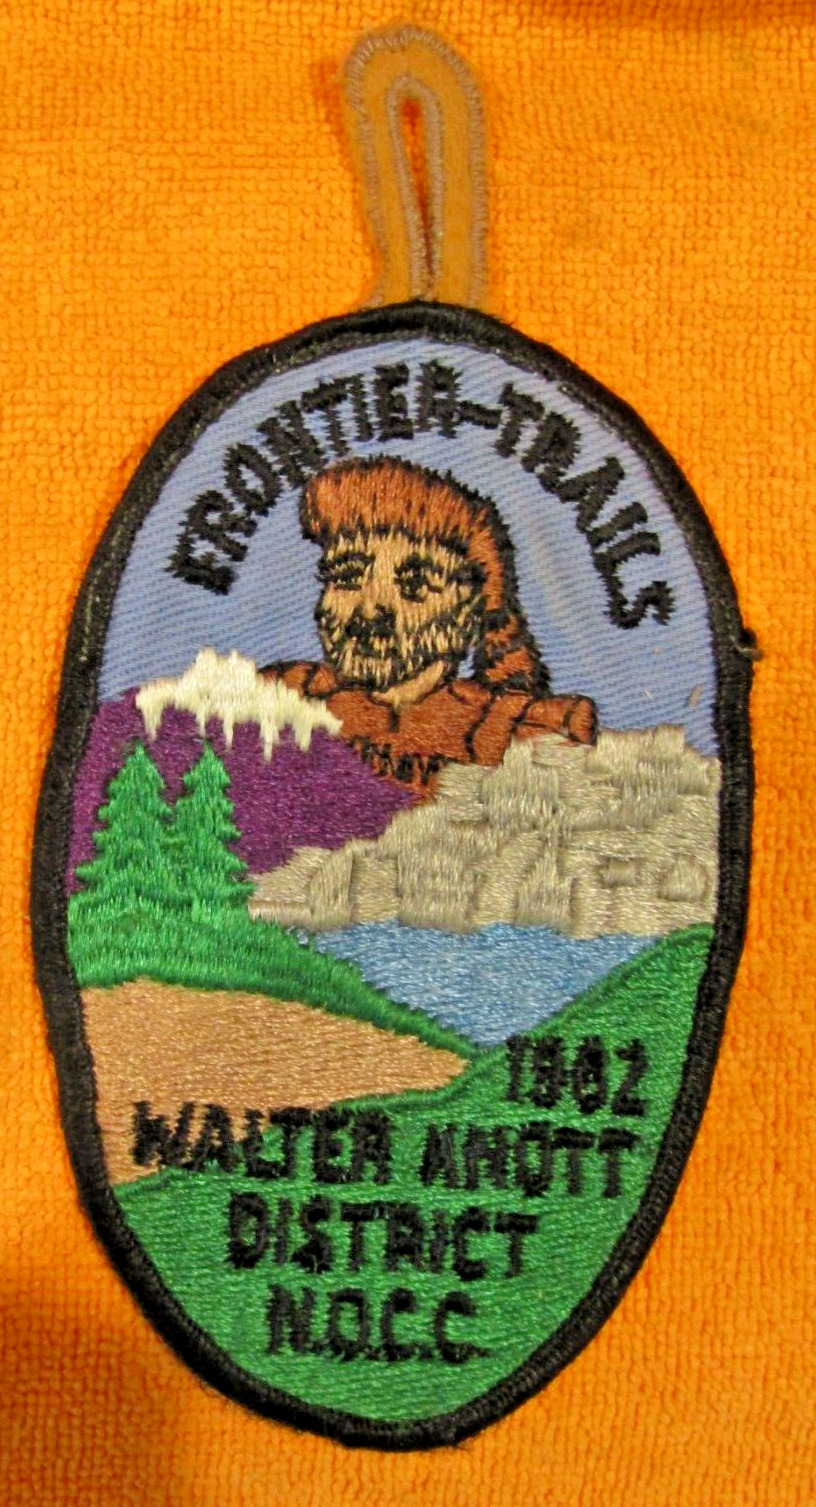 1962 Frontier-Trails Walter Knott District Northern Orange County Council